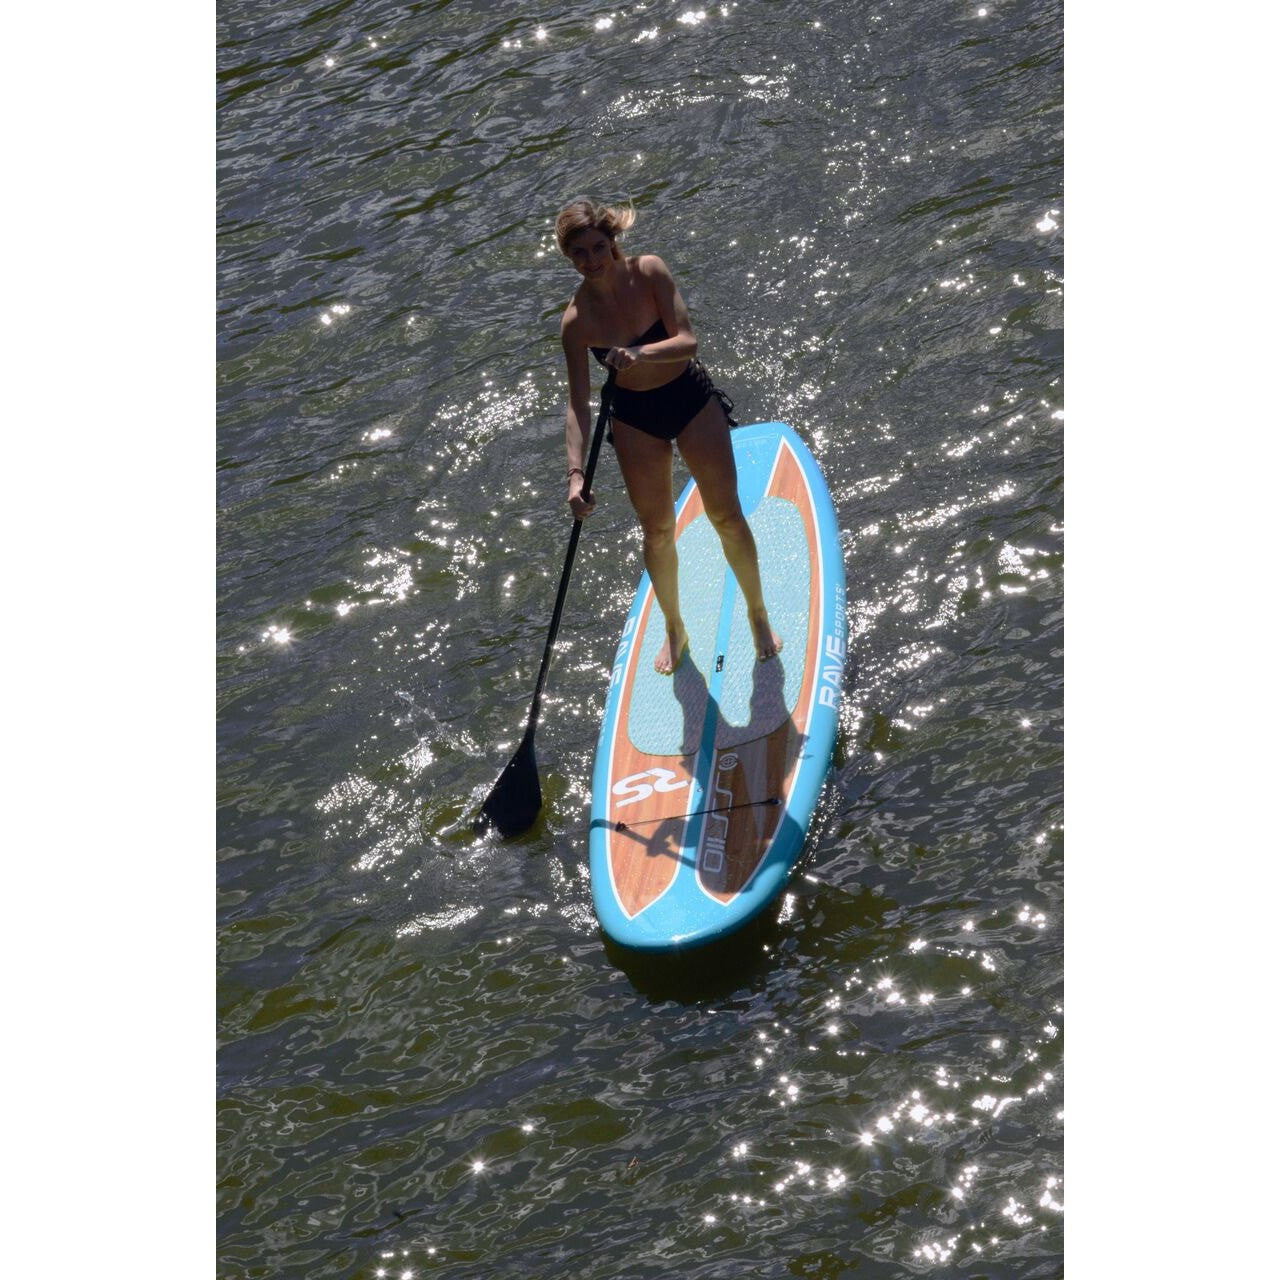 Up Sports - Creek Paddle 02728 Rave SS110 Kayak Shoreline Board Series Stand SUP -